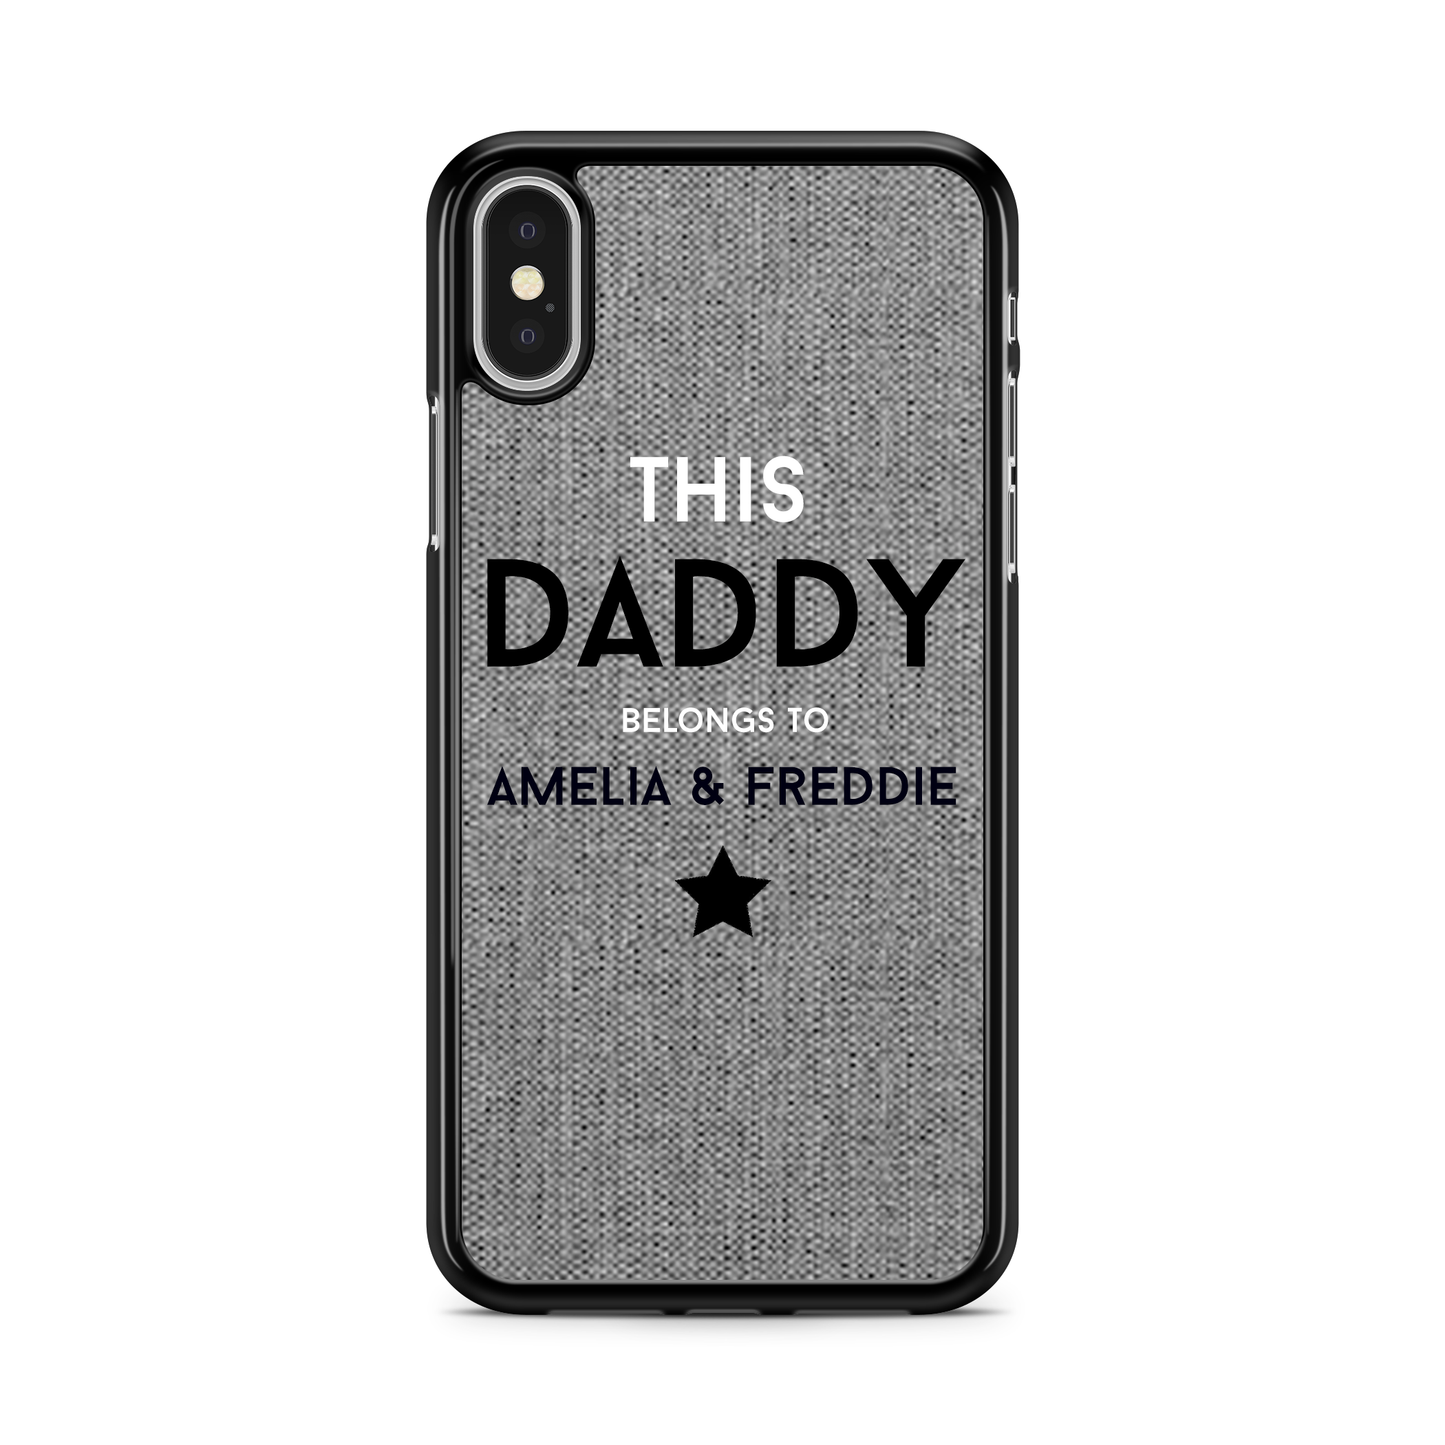 This Daddy belongs to Personalized Phone Case